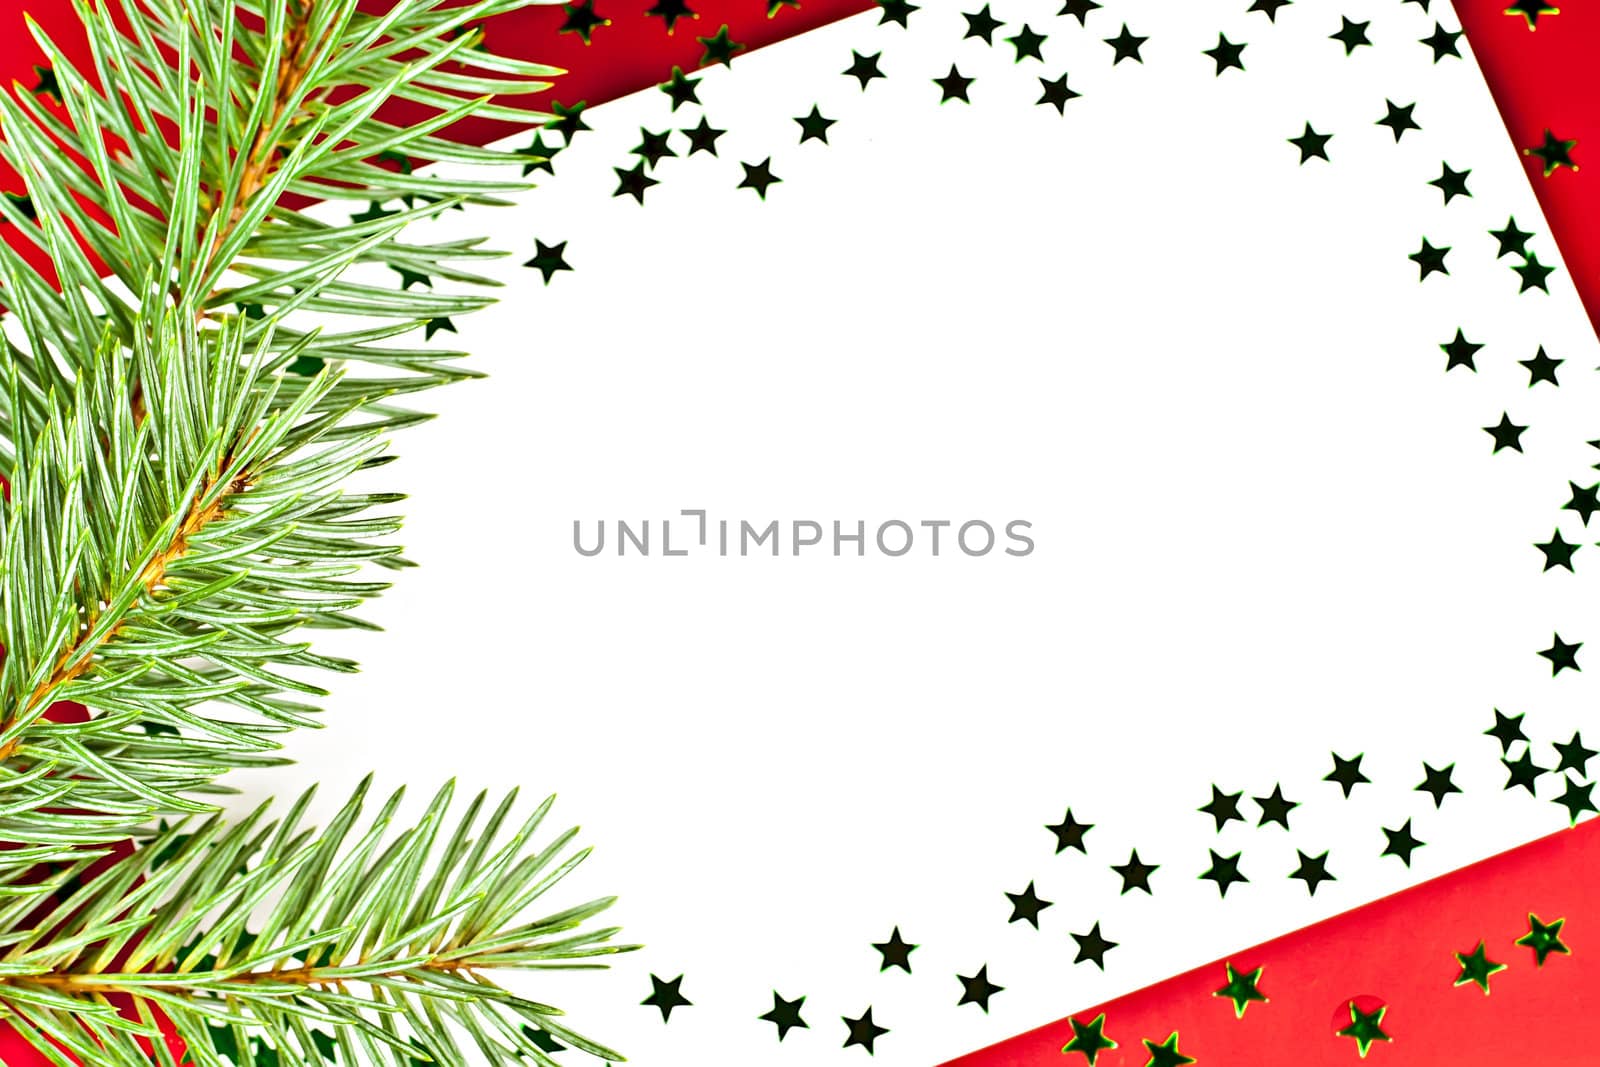 On a red background white greeting card with spruce twigs and green stars.
